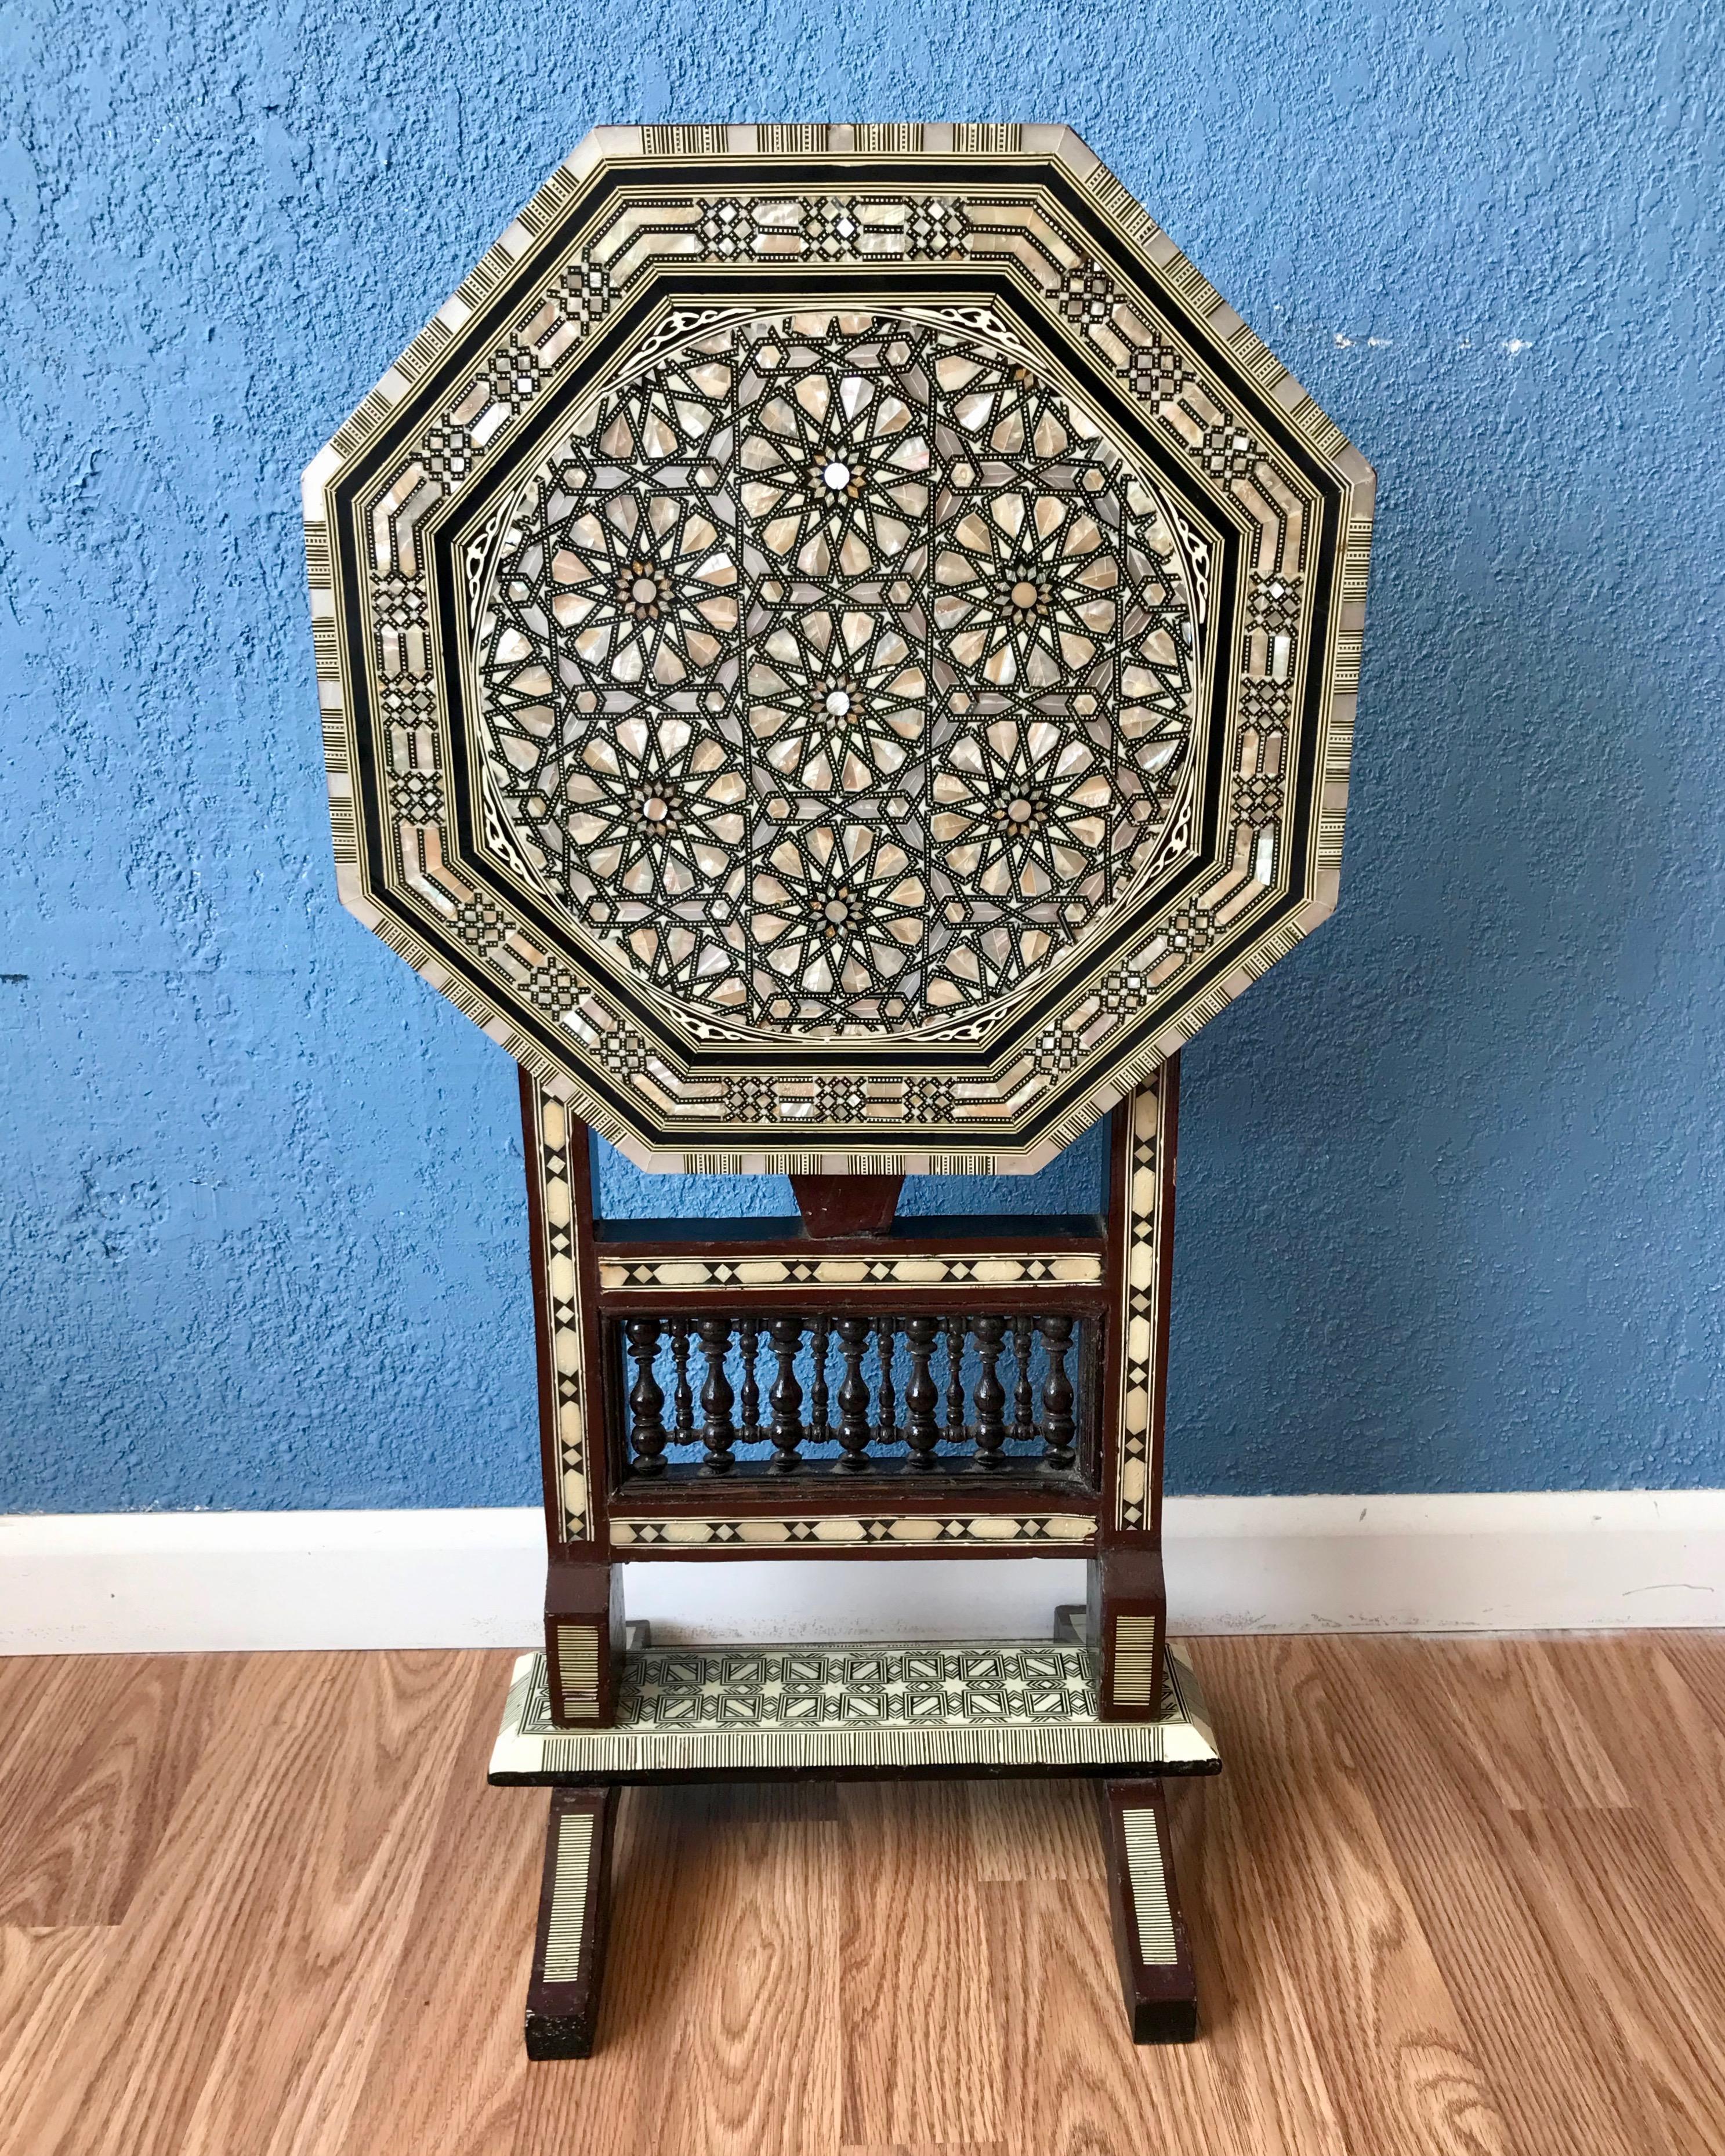 Elaborately inlaid with mother of pearl. A fine example with a bold and
superb design. An eye catching occasional or drink table.
(Measured when closed).